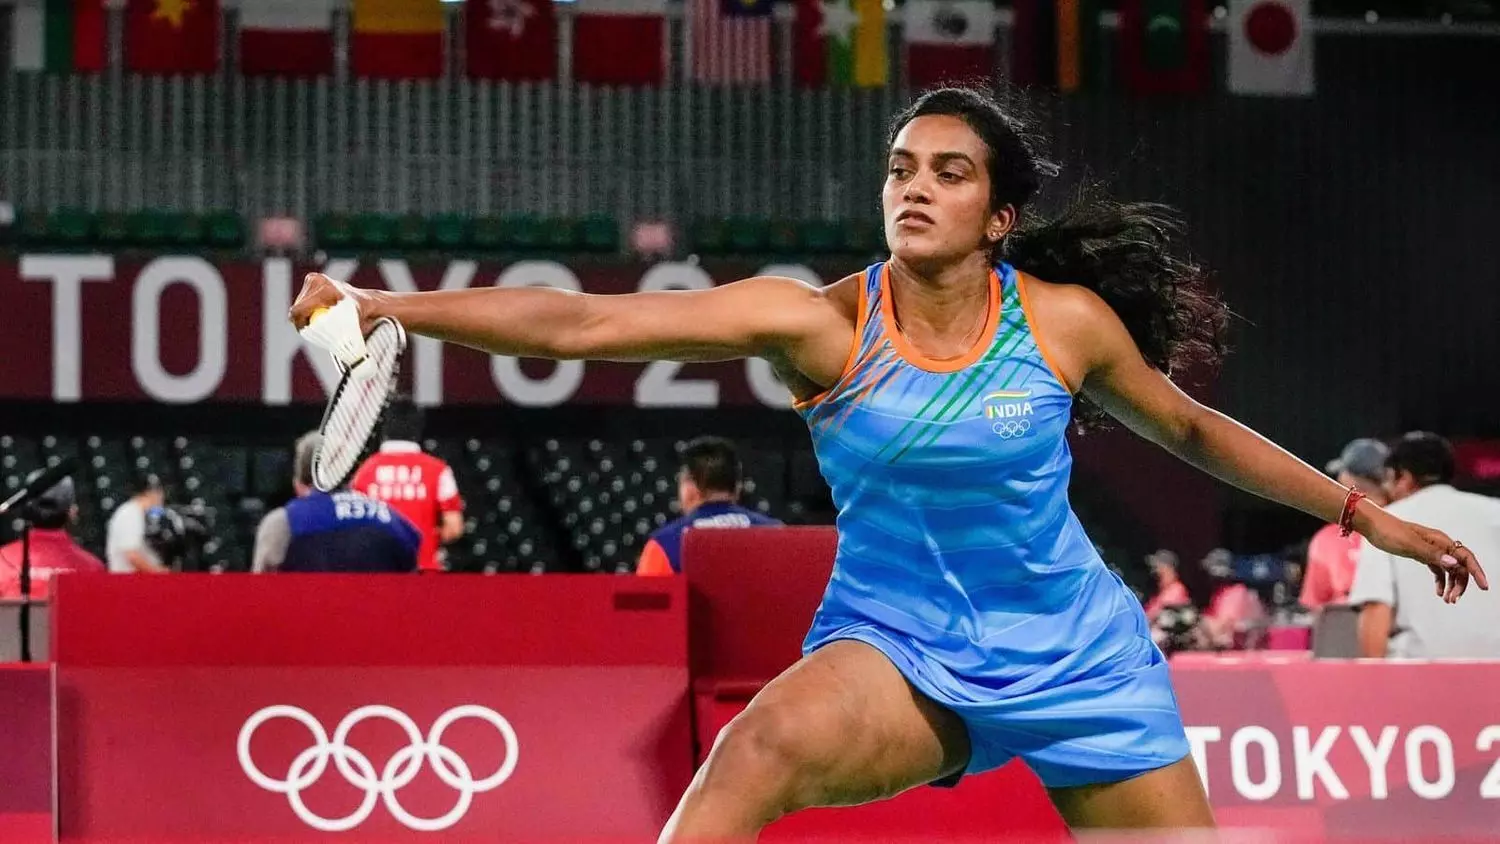 Tokyo Olympics Day 8 LIVE, July 31 — Sindhu in semifinals, Pooja Rani in quarters—Updates, results, blog, scores